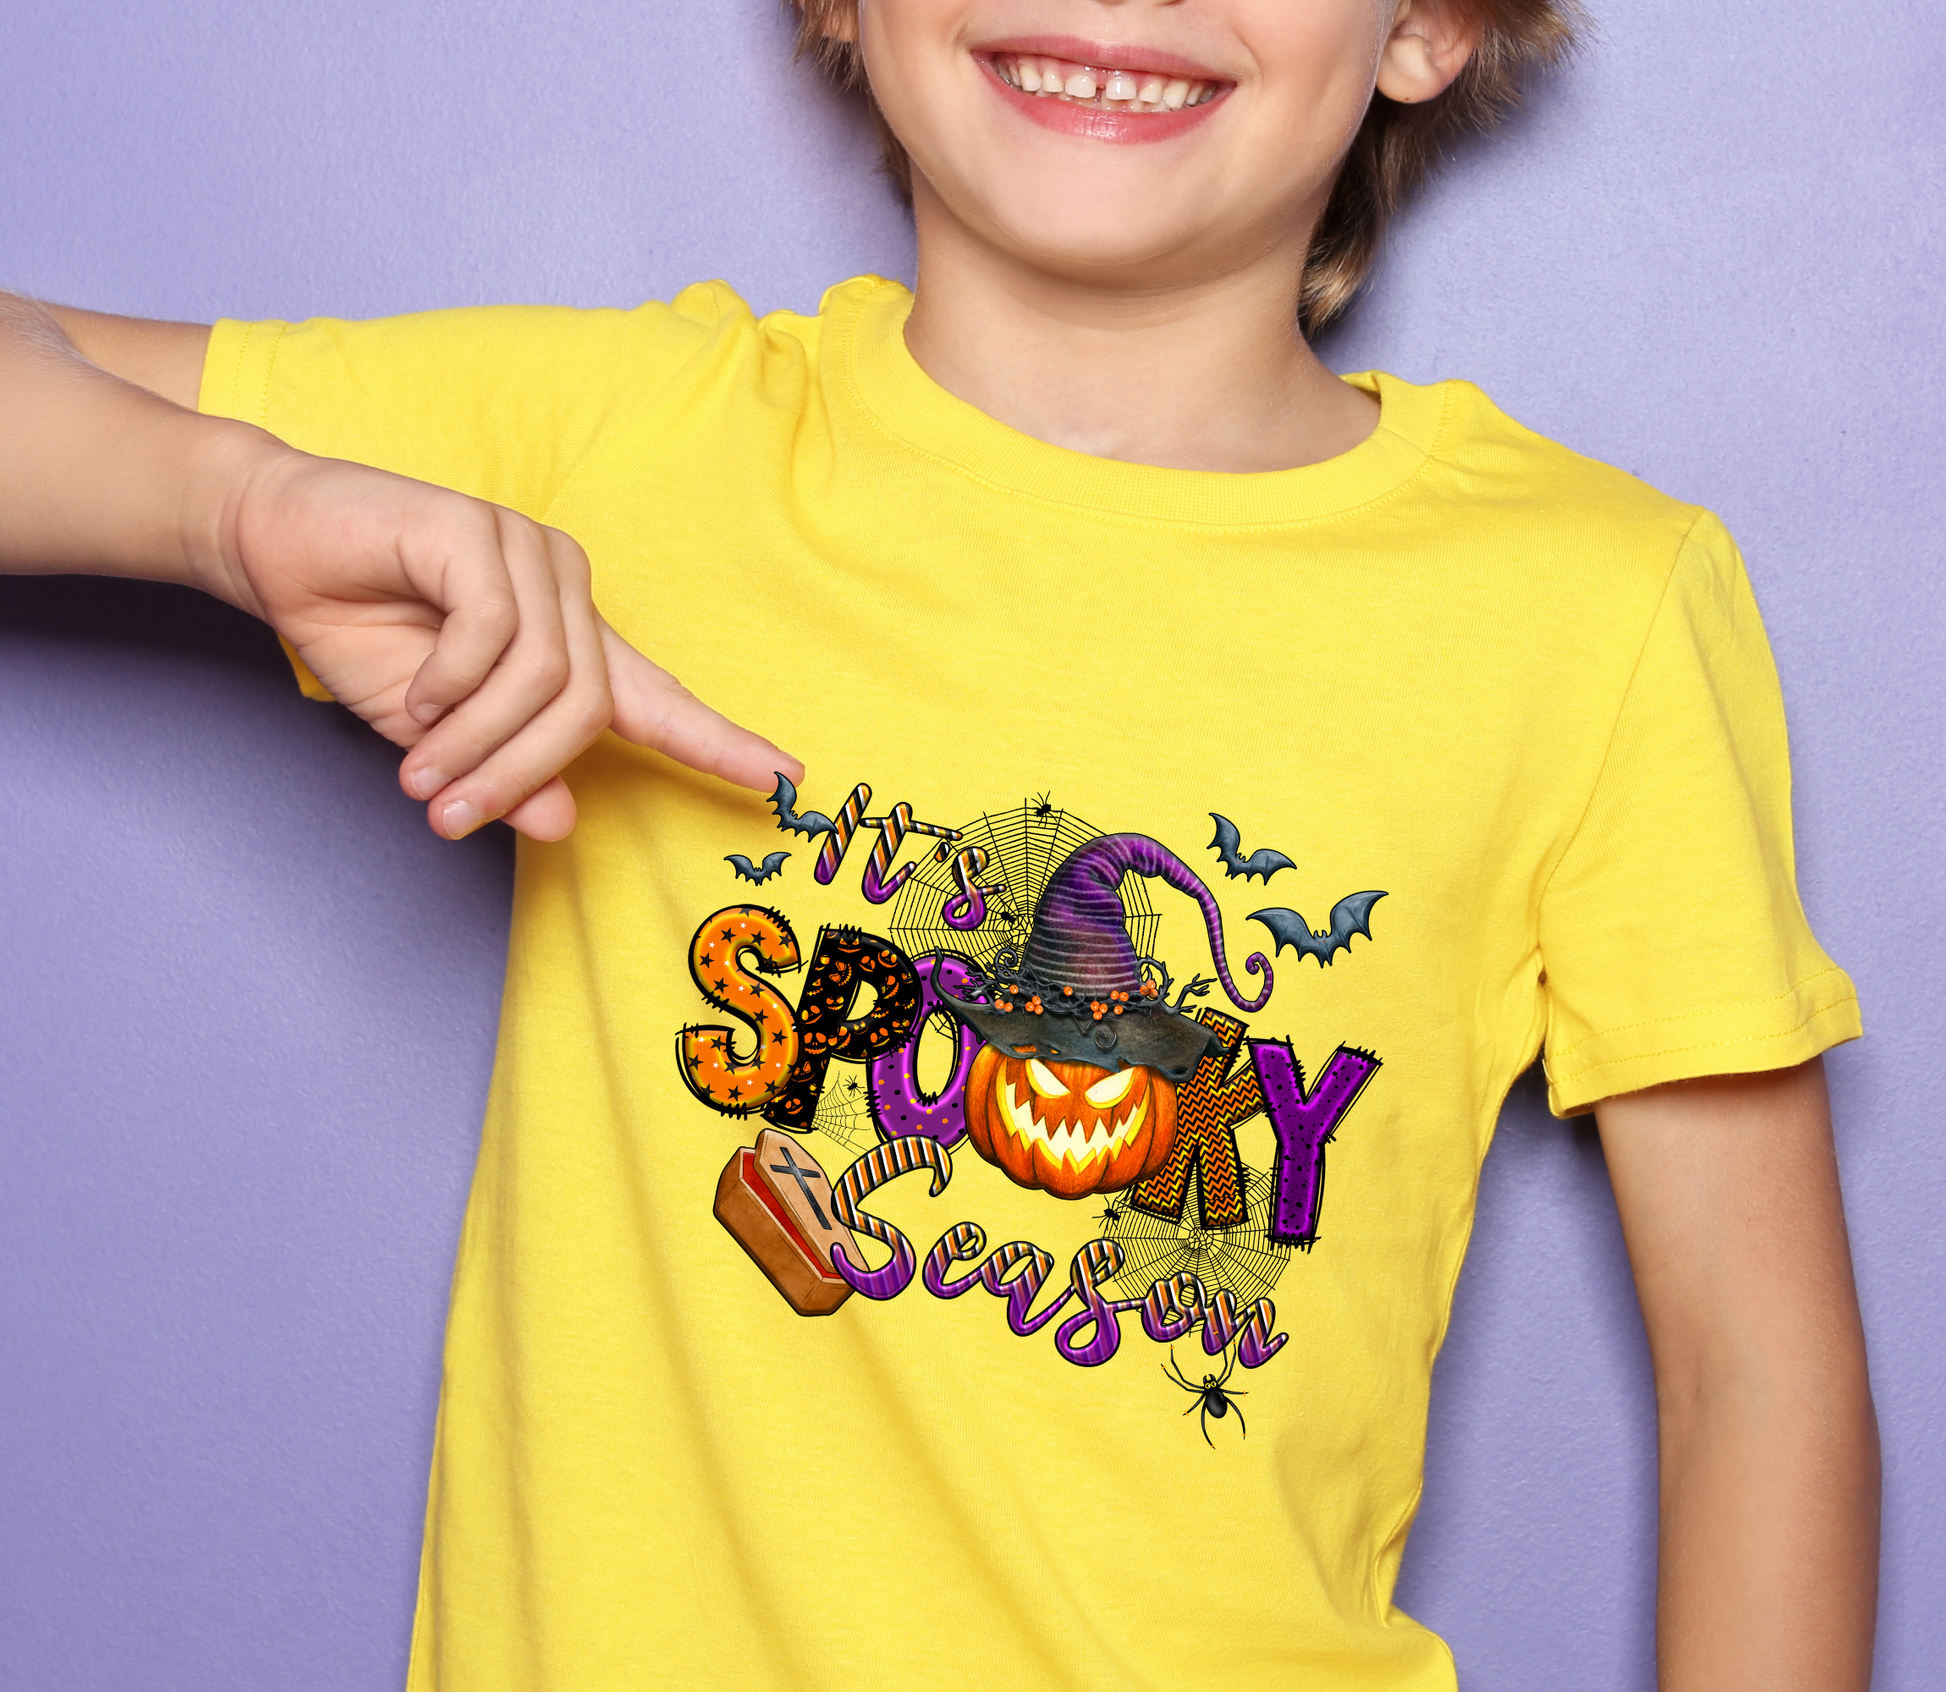 Boy child in yellow shirt with 'It's a Spooky Season' Halloween DTF design - LuxuryDTF.com